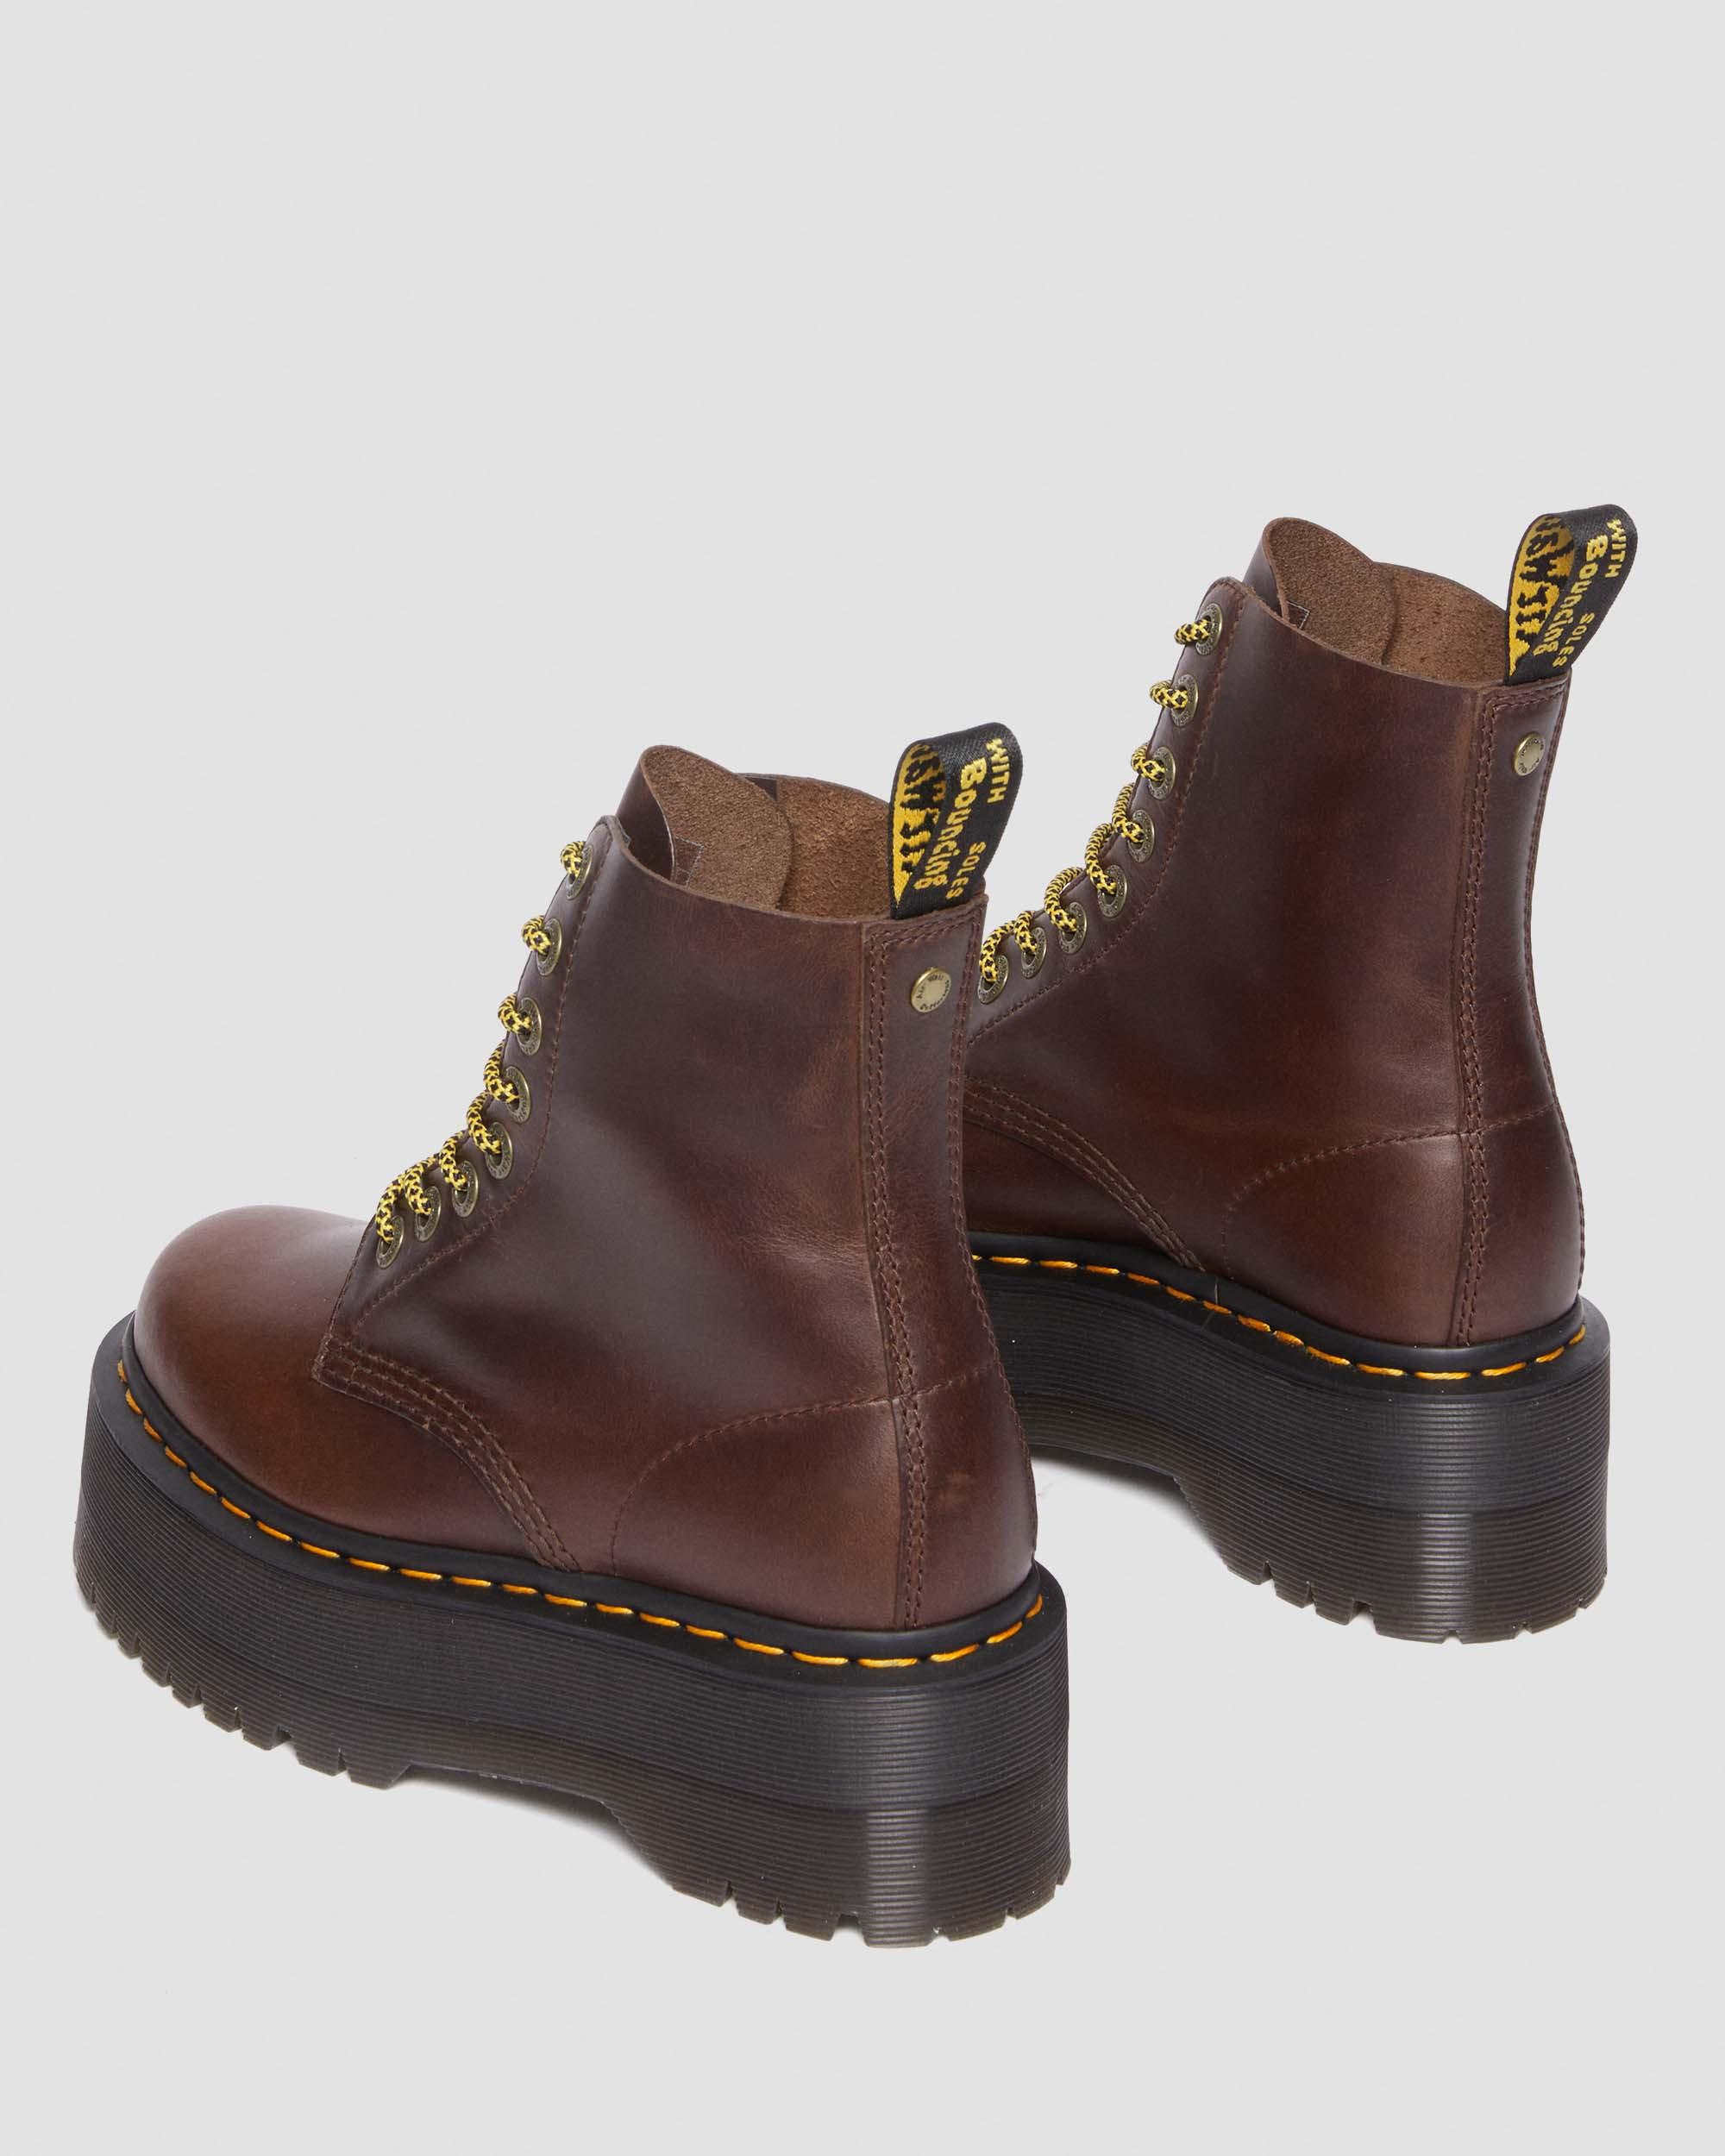 1460 Pascal Max Leather Platform Boots in Dark Brown